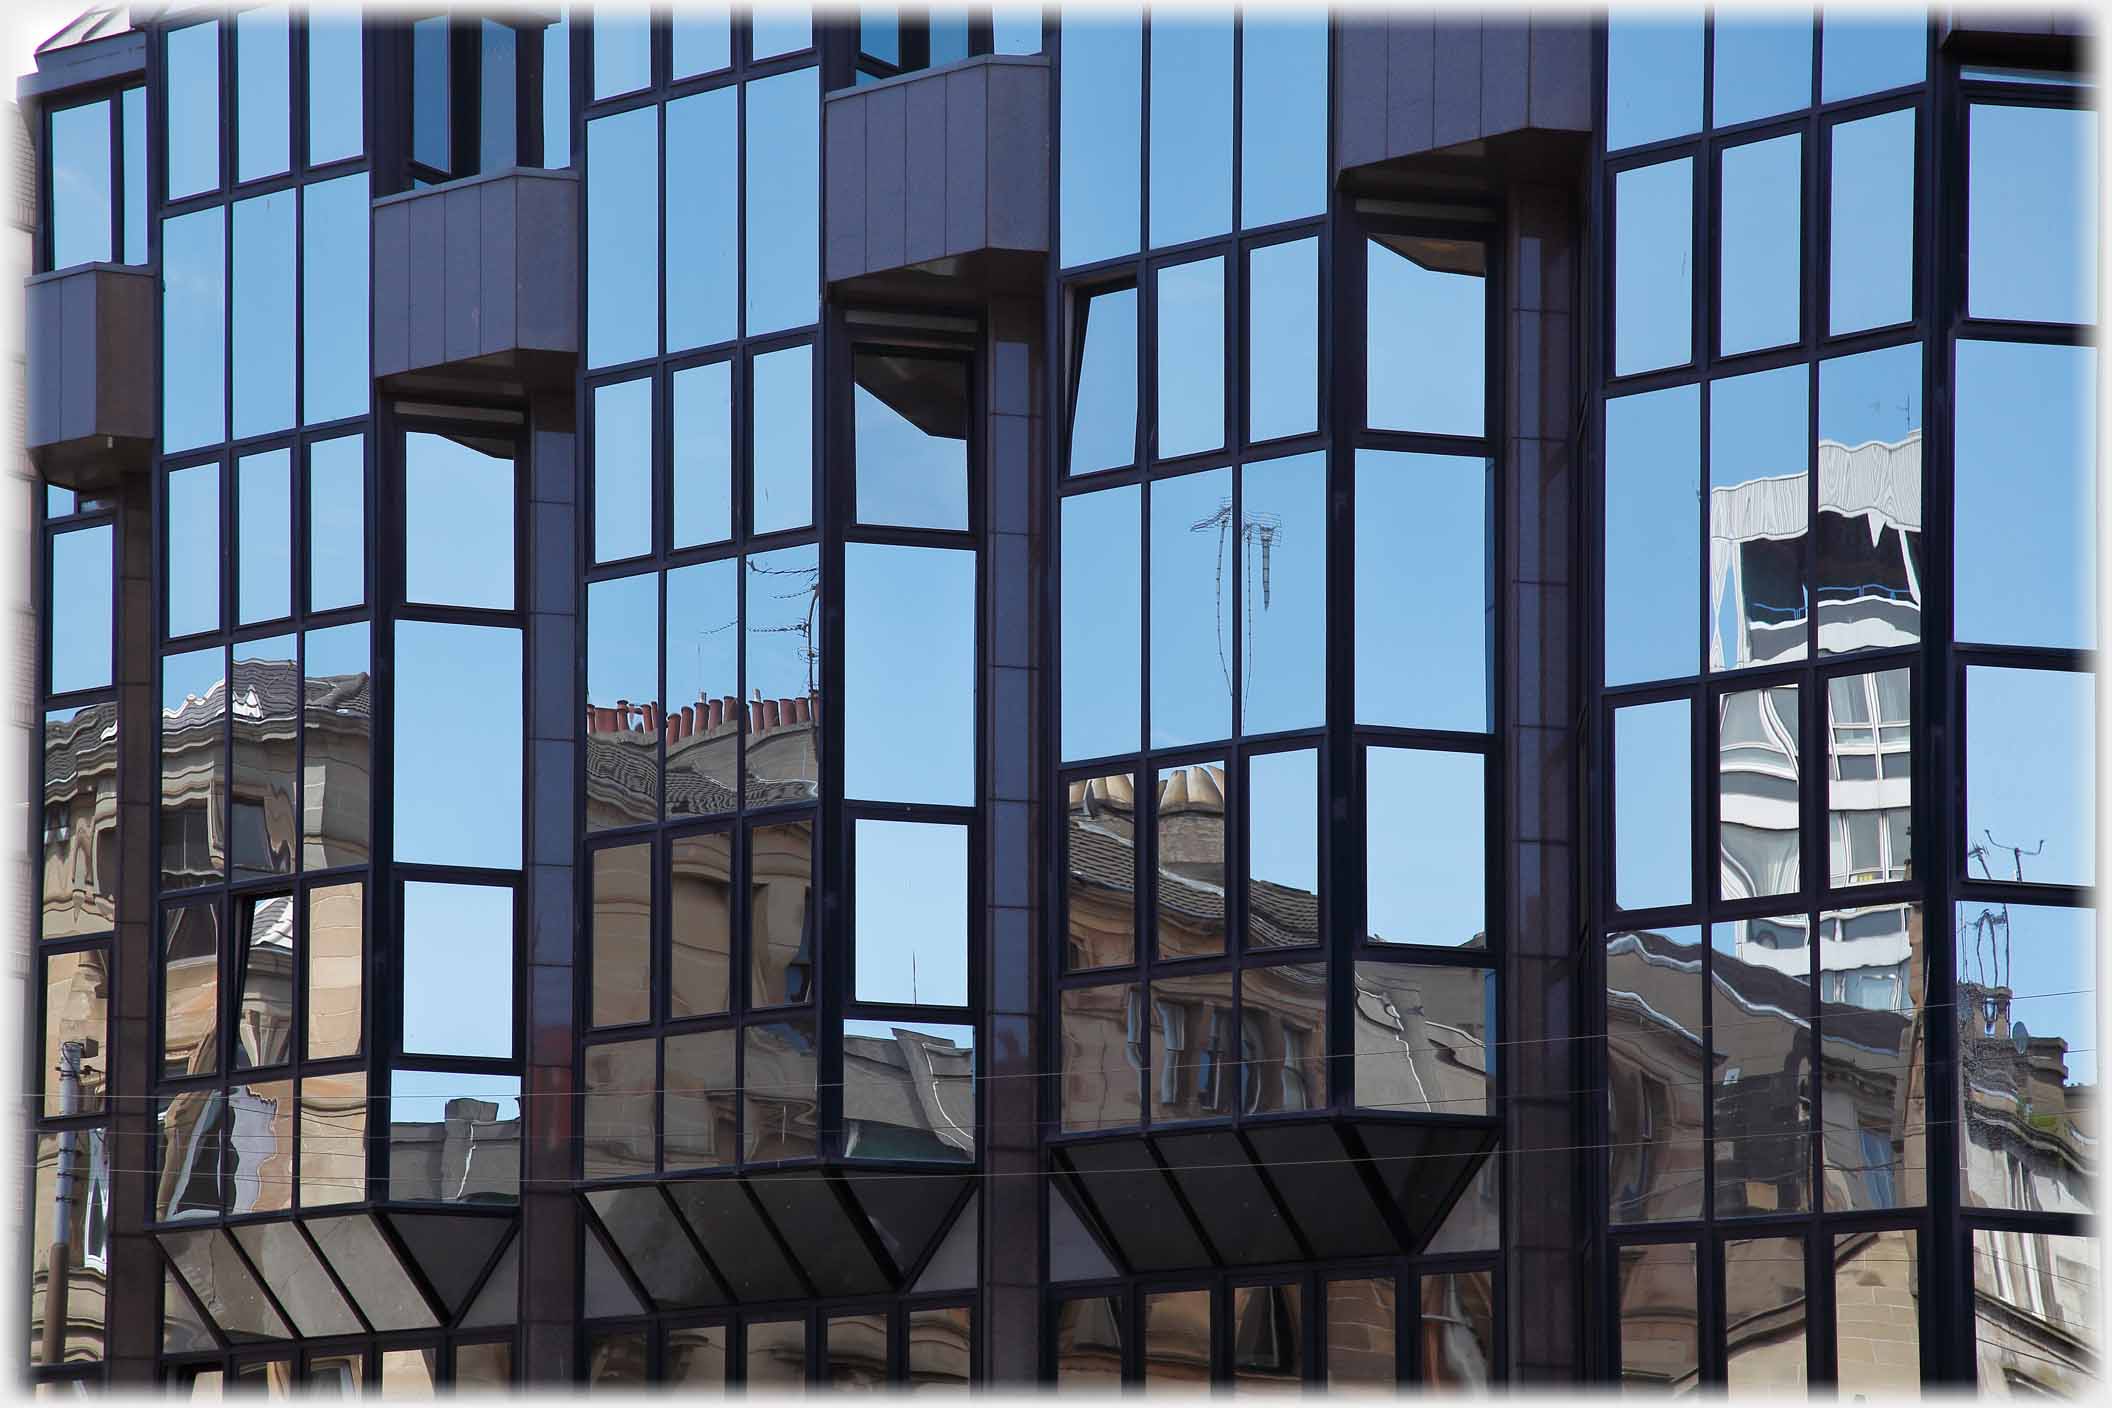 Glass fronted building with reflections of blue sky and older buildings.